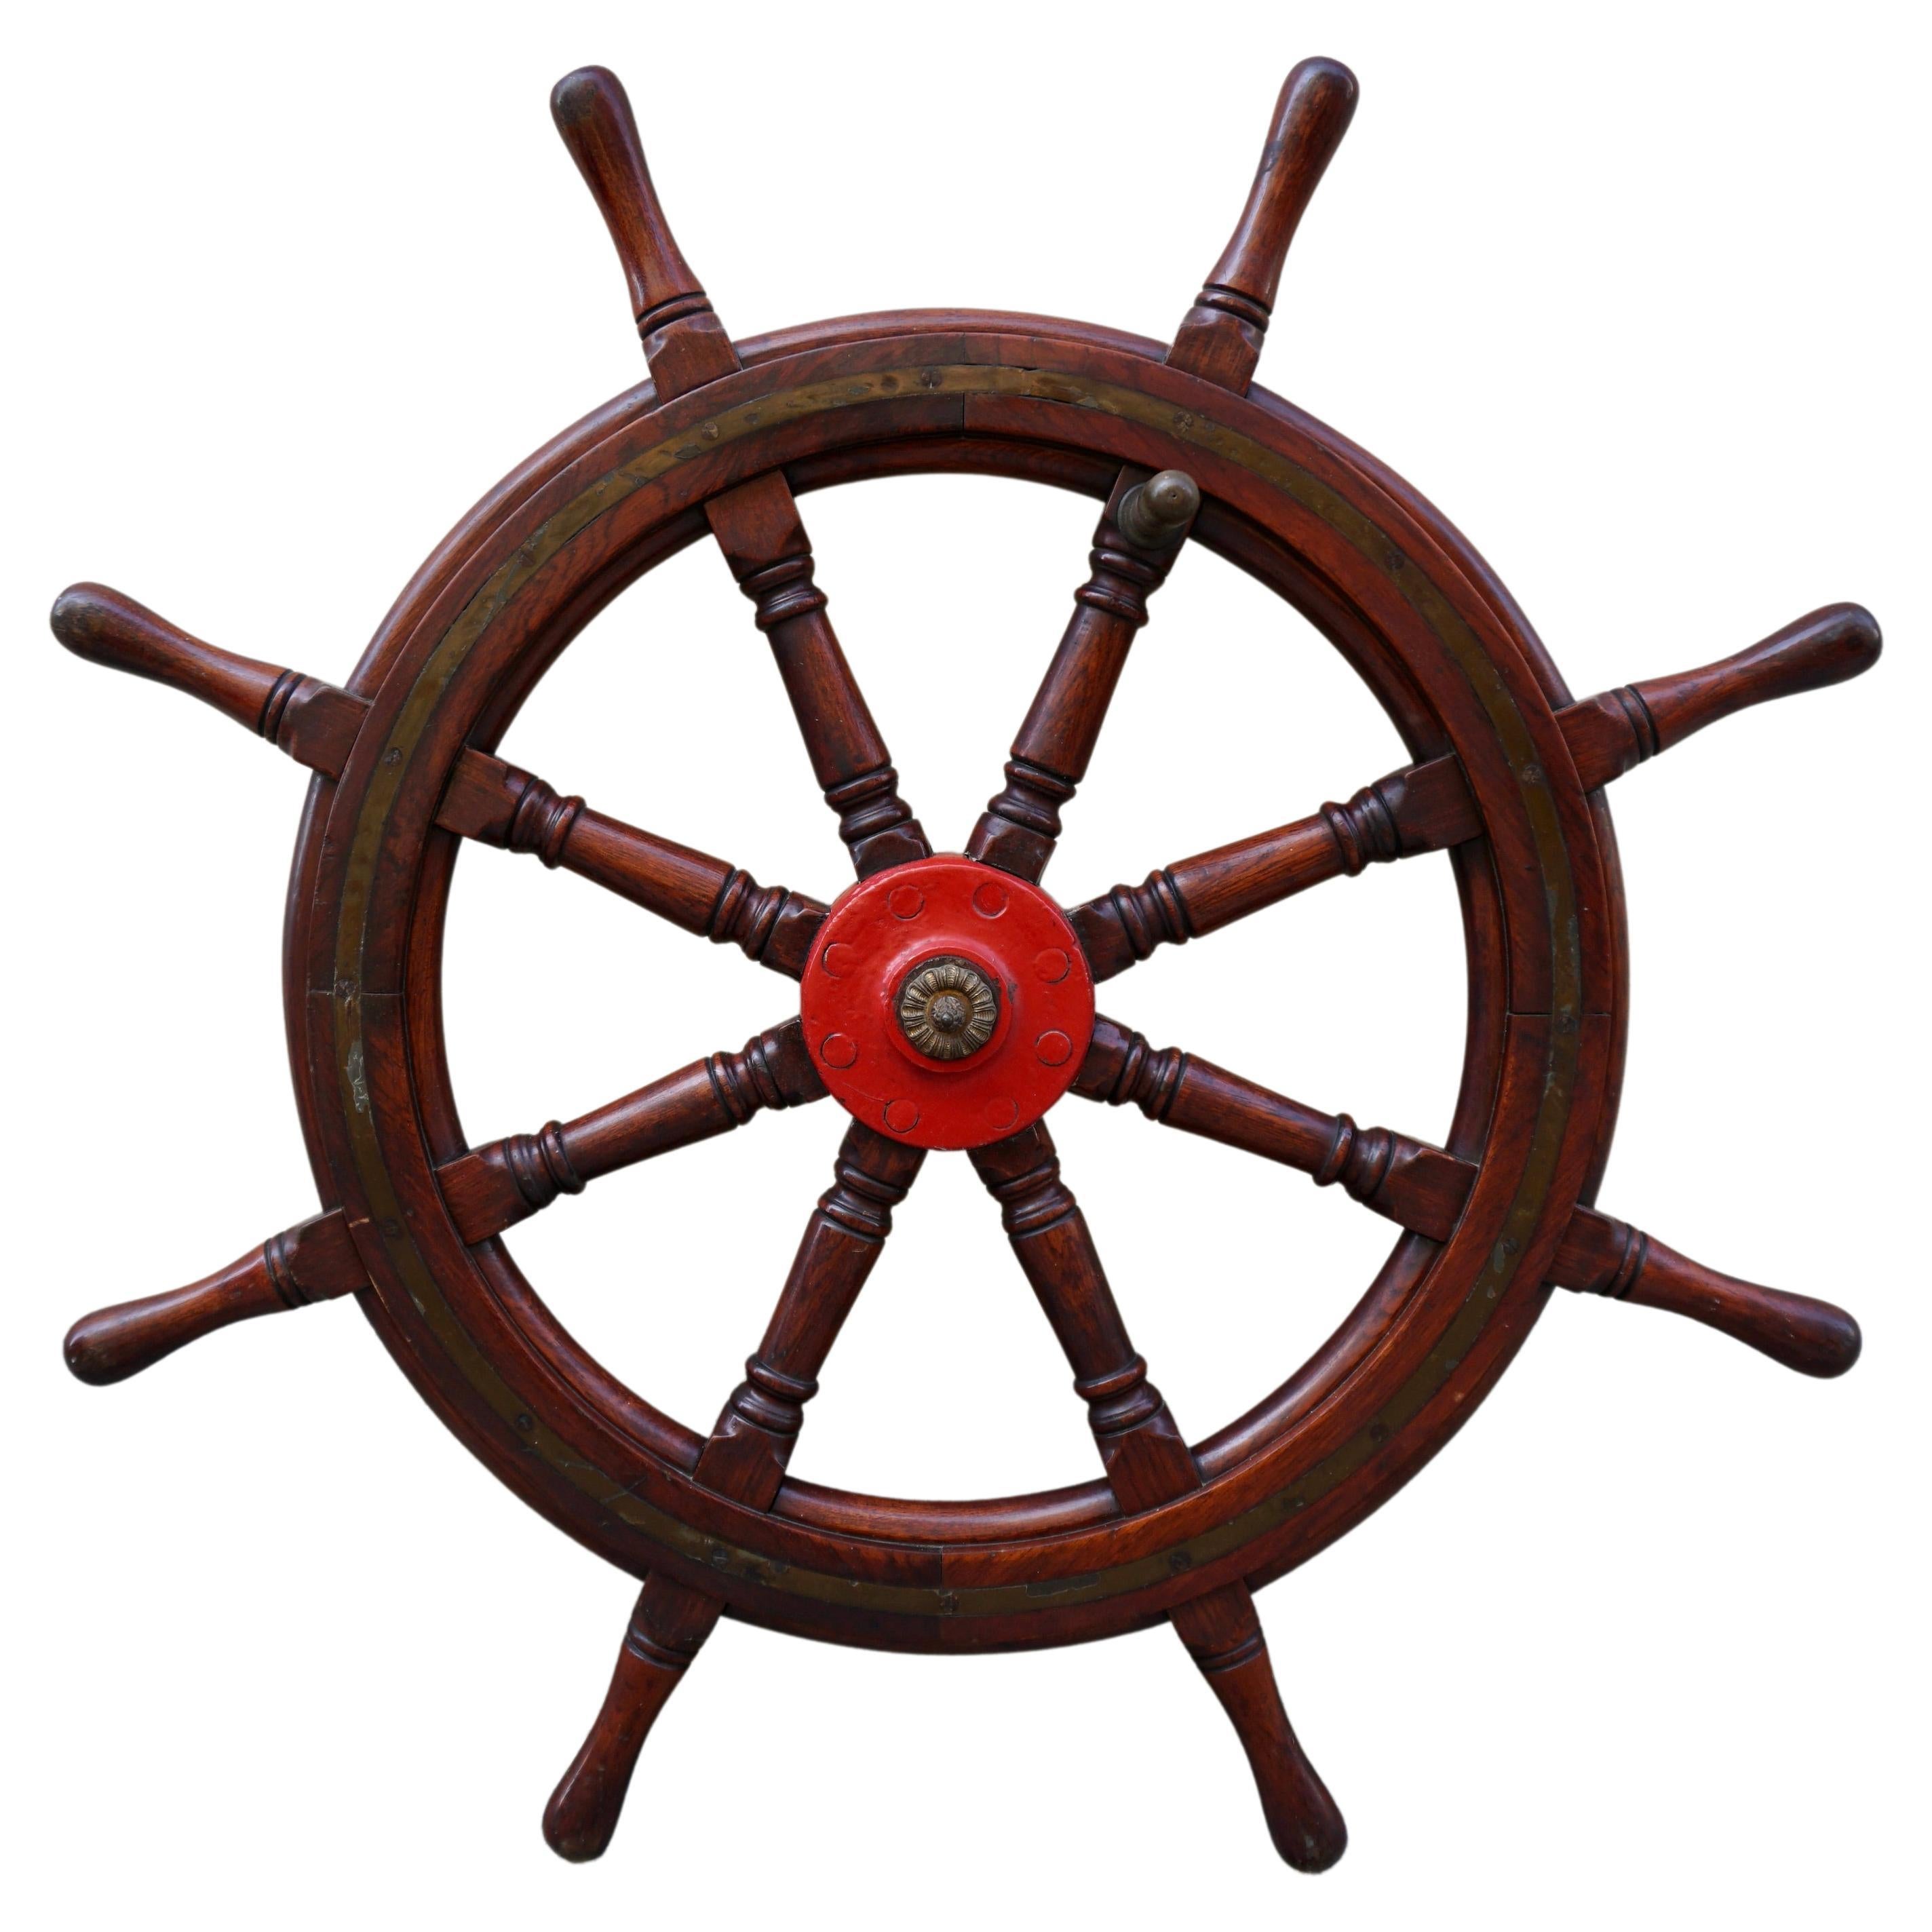 This is a superb and very large antique Victorian mahogany and brass set ships wheel, circa 1880-1900 in date. This exceptional nautical collectable features eight elegant trunking cylindrical spokes ending in handles, and made from beautiful